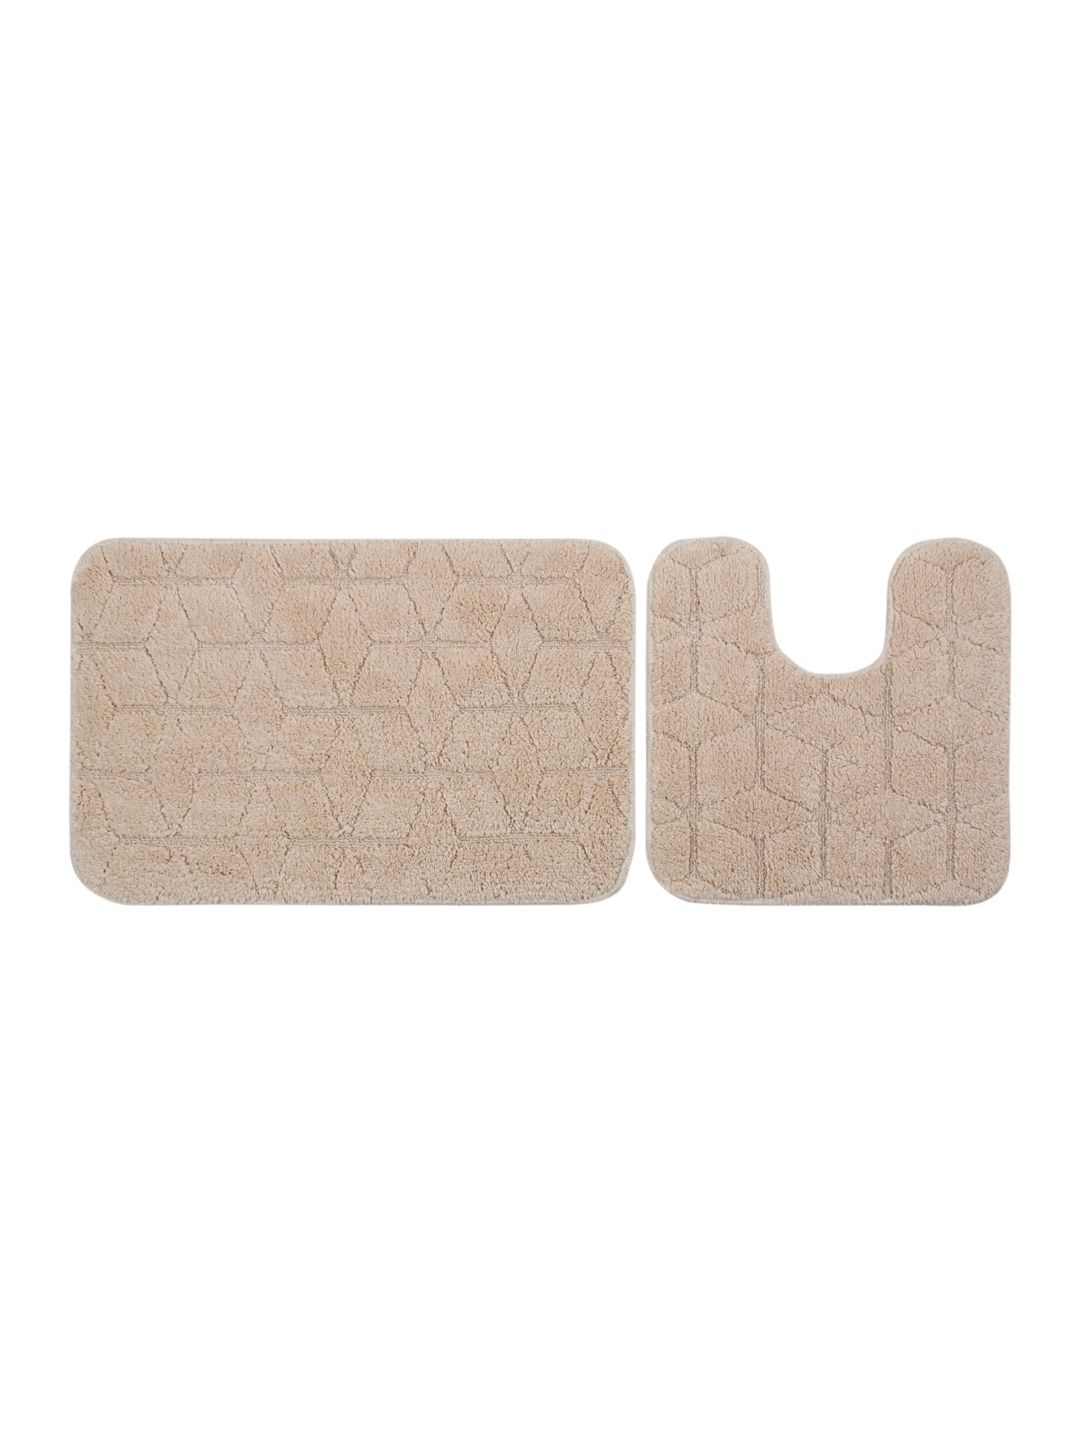 Saral Home Beige Set of 2 Rectangular Bath Rugs Price in India